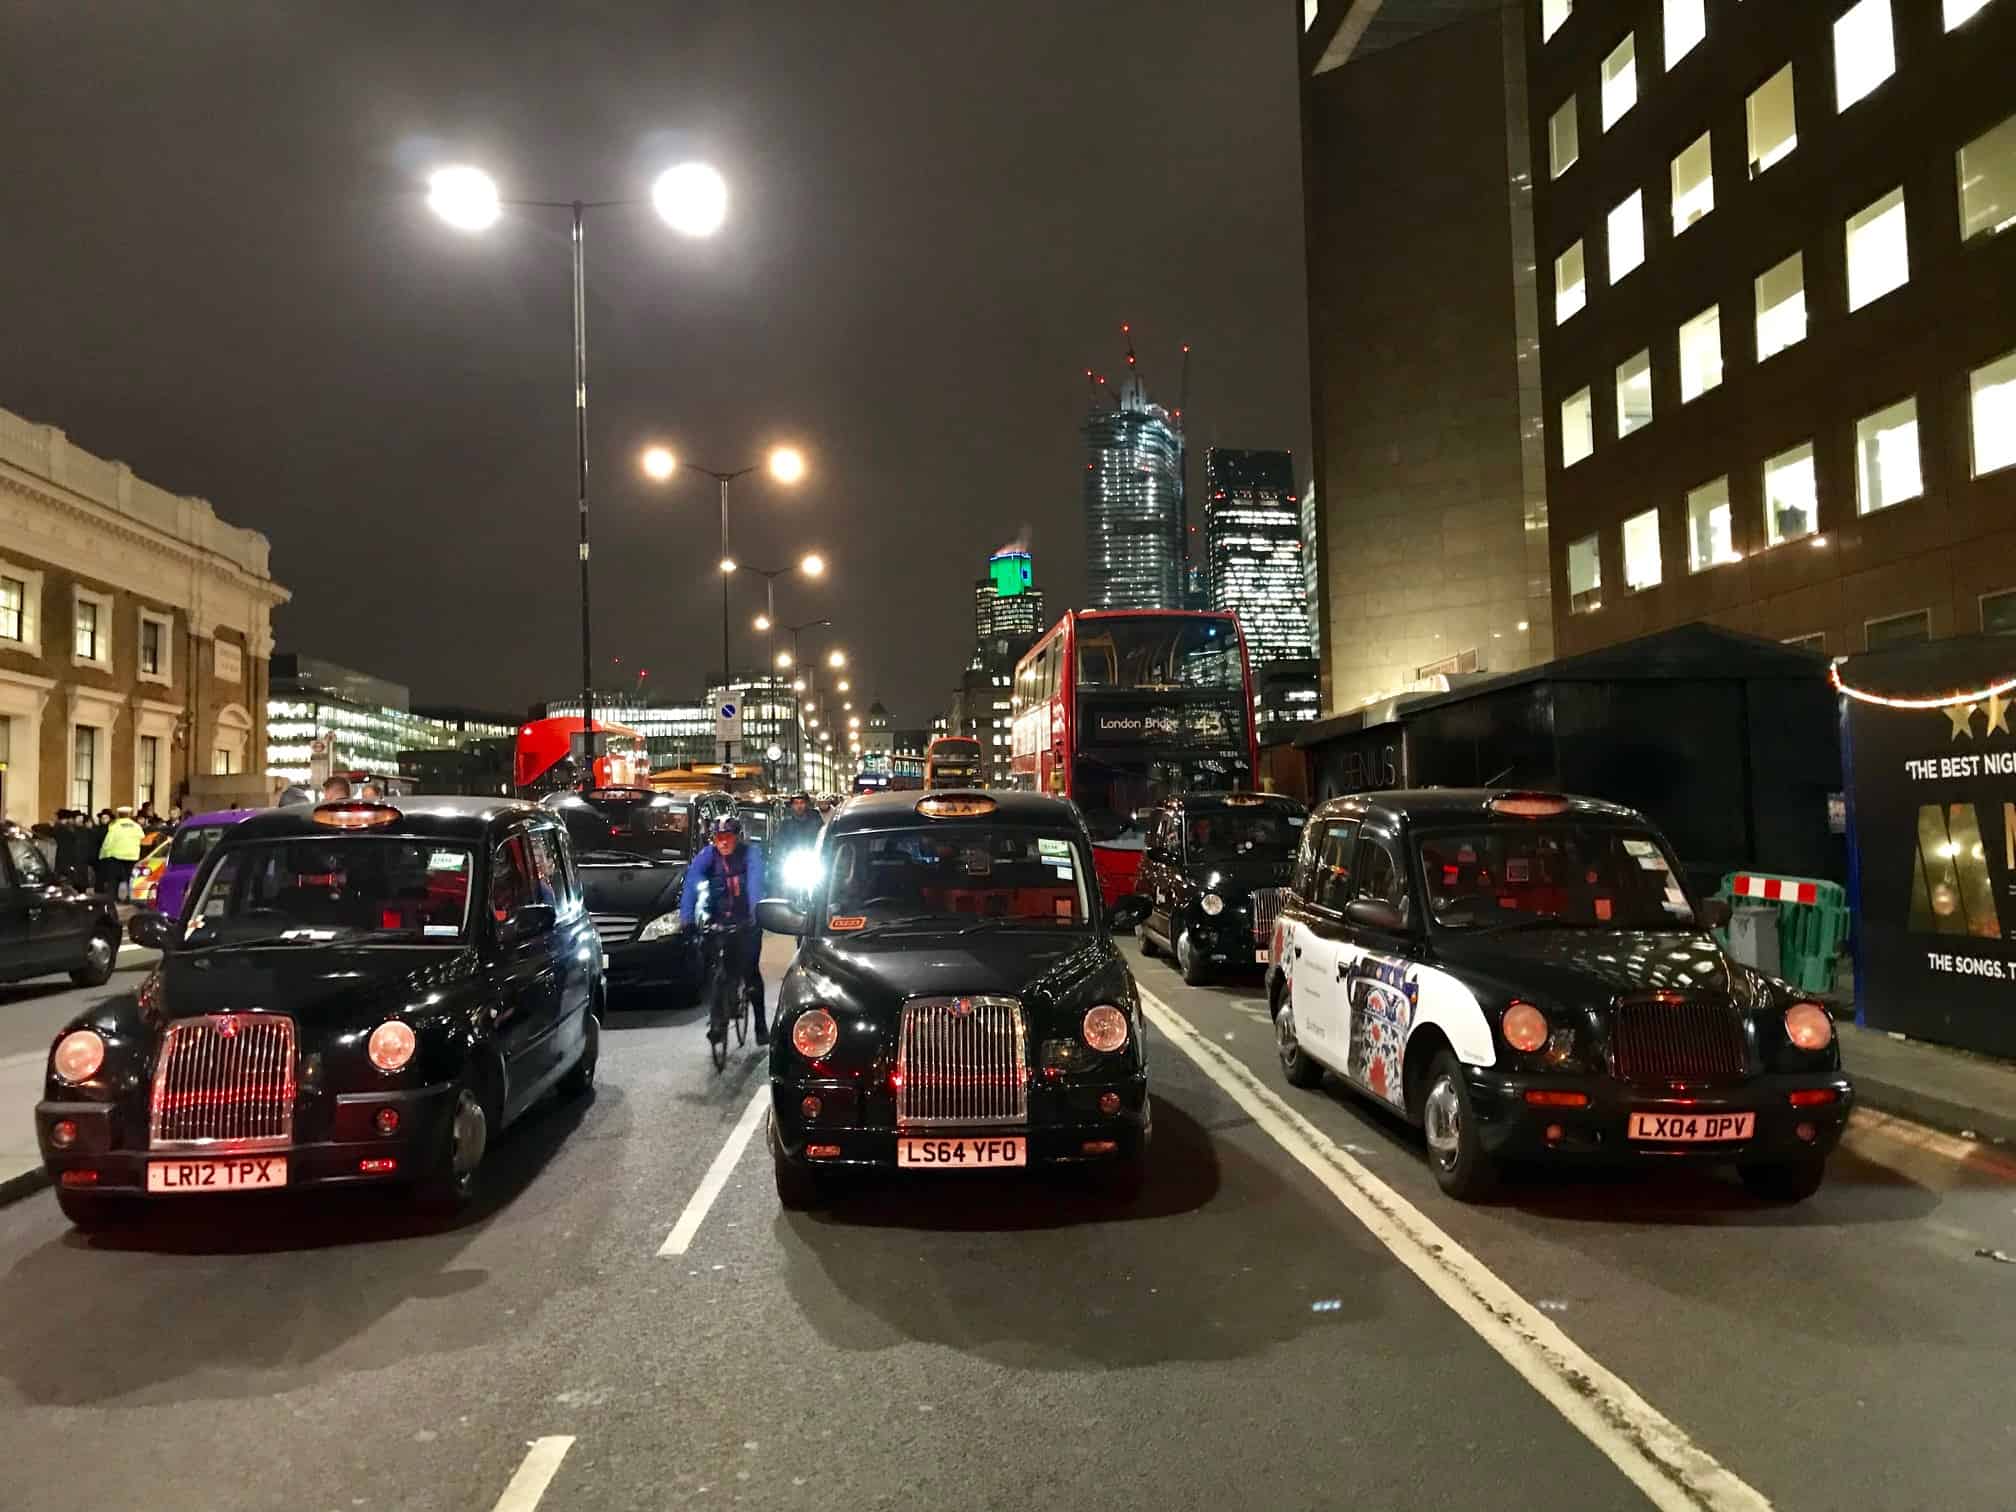 Black cabs are blockading London Bridge this week in a row over proposed taxi restrictions on Tooley Street